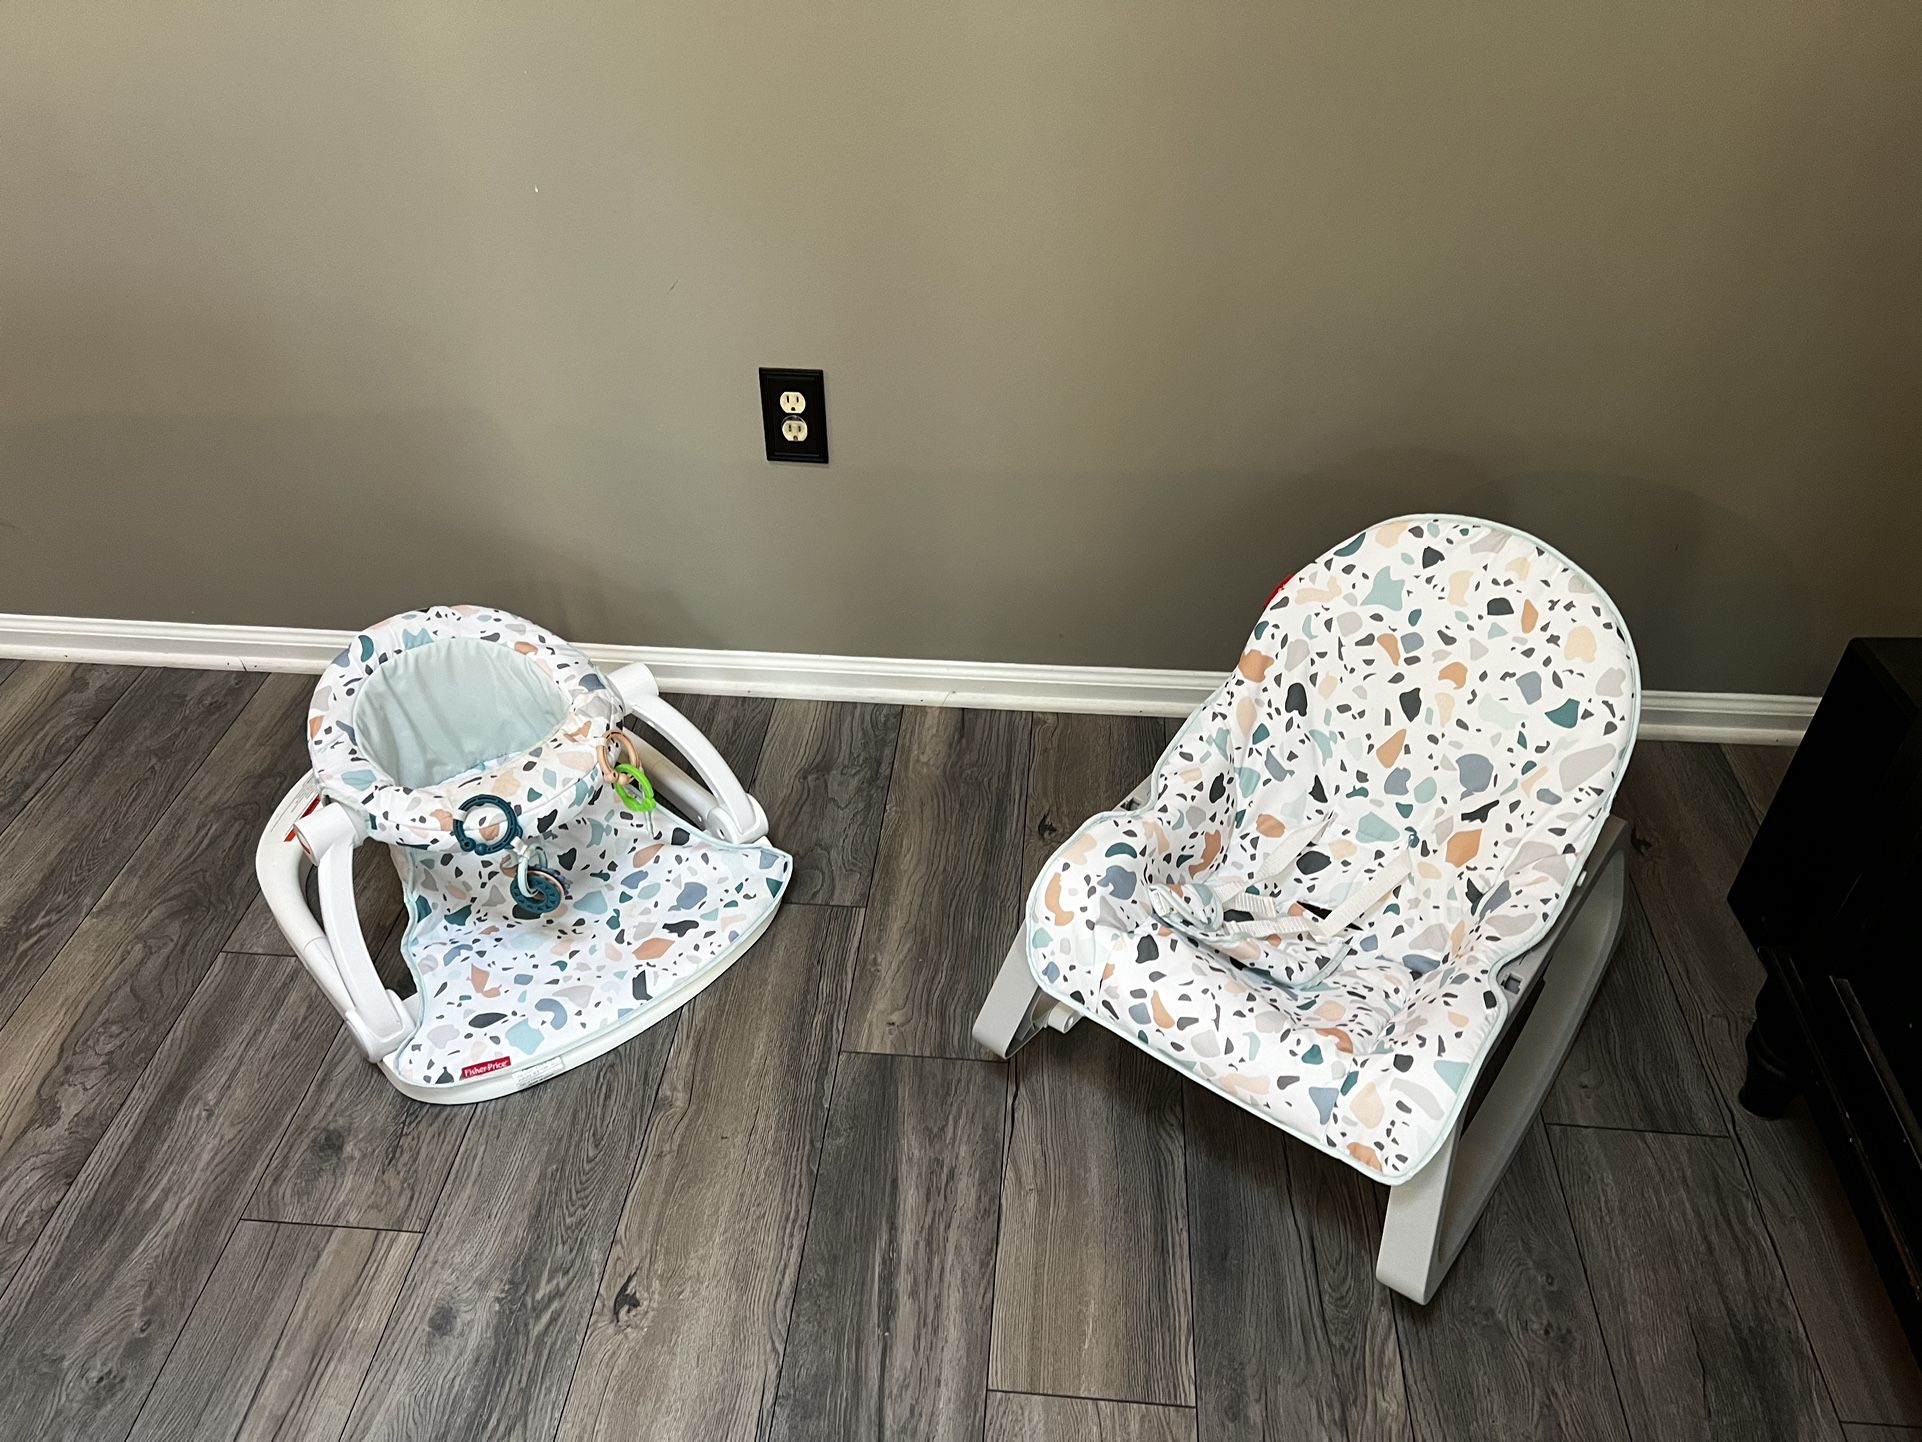 Baby Chairs